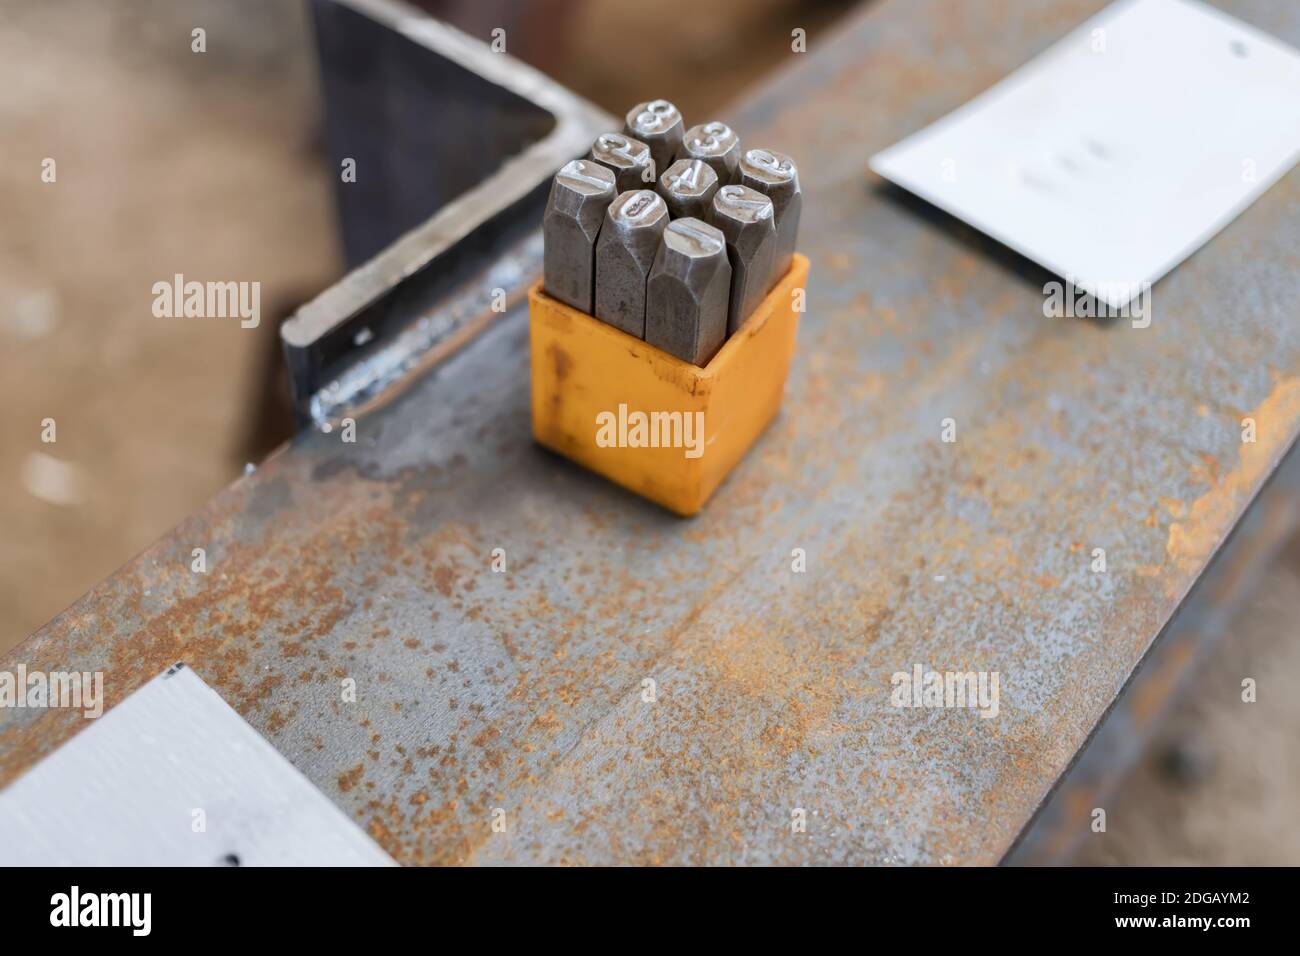 A set of cores with numbers for knocking out numbers on the plates Stock Photo